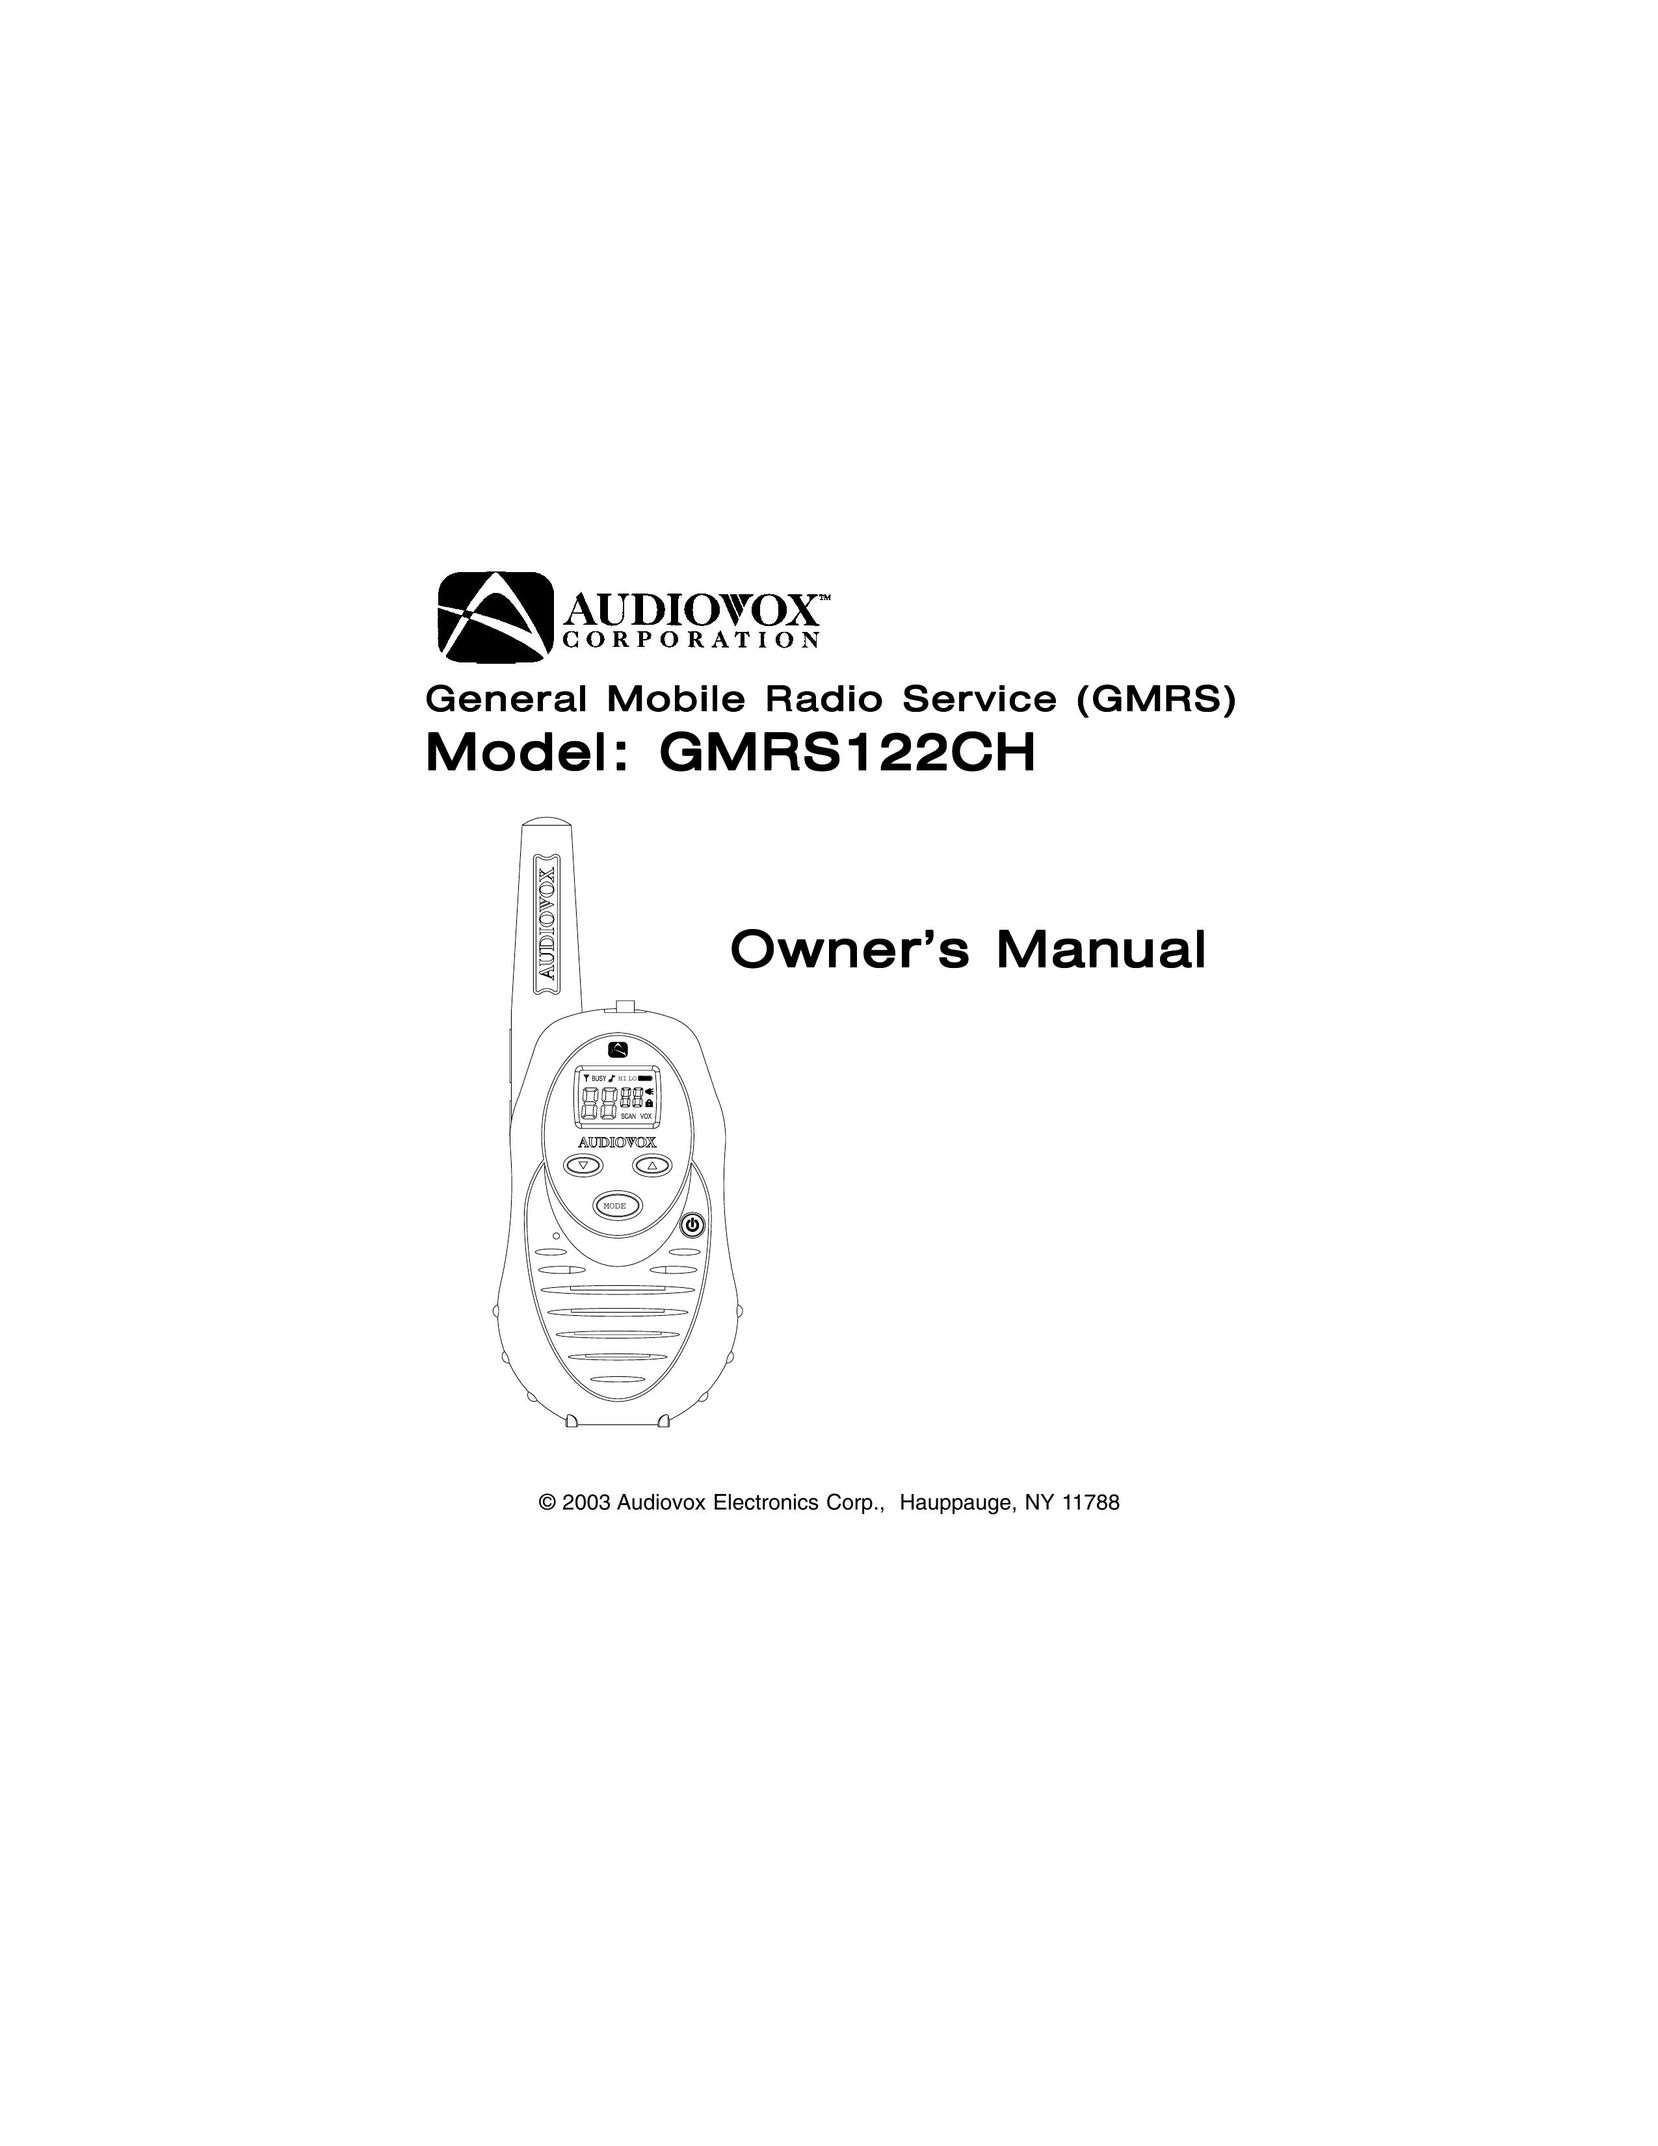 Audiovox GMRS122CH Two-Way Radio User Manual